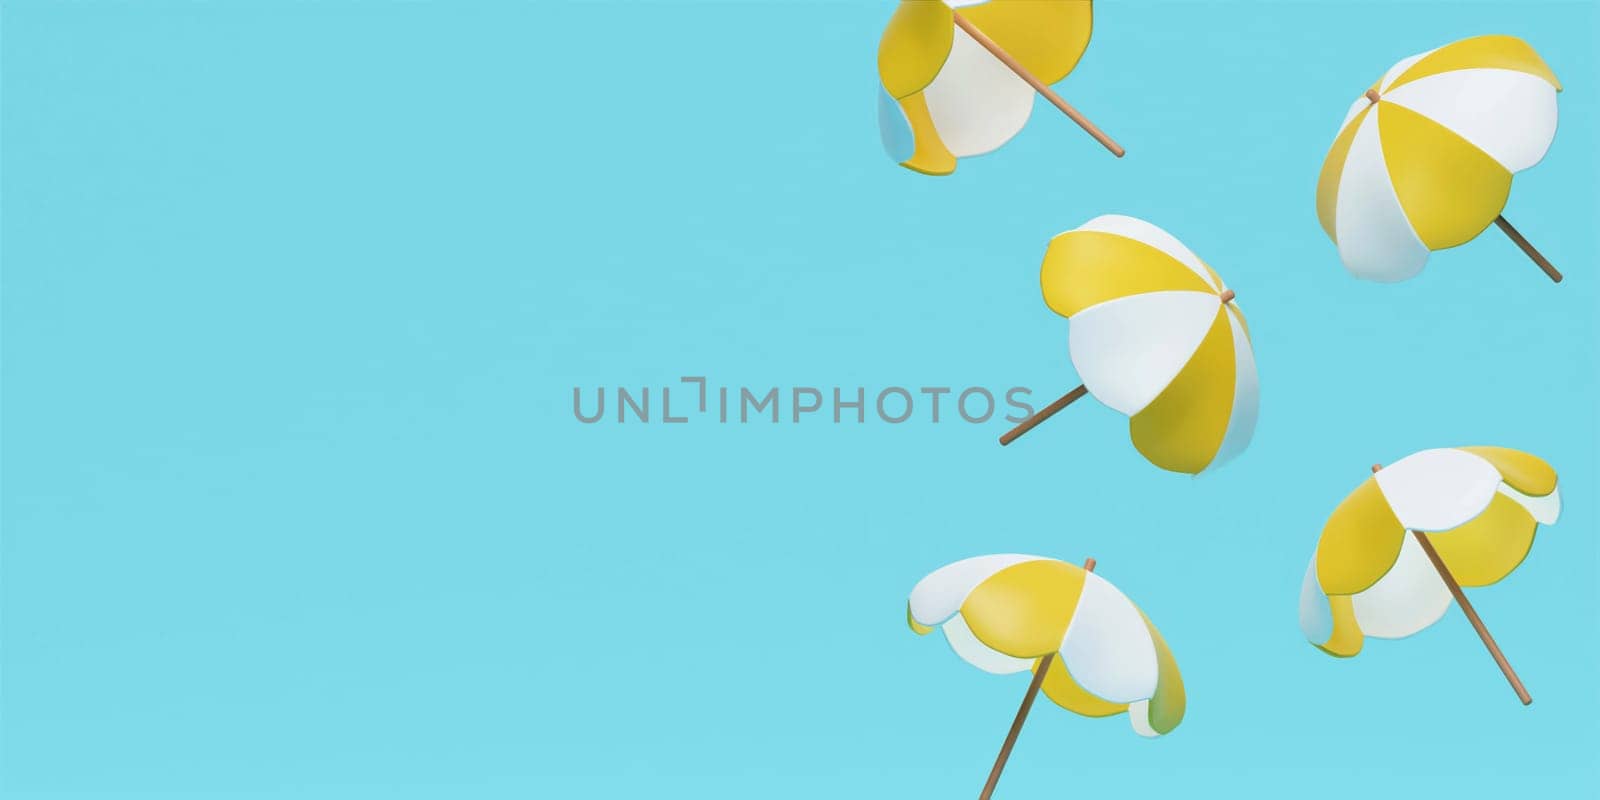 float yellow umbrella isolate on pastel blue background, summer concept, concept of summer. 3 illustration banner. 3d rendering illustration by meepiangraphic